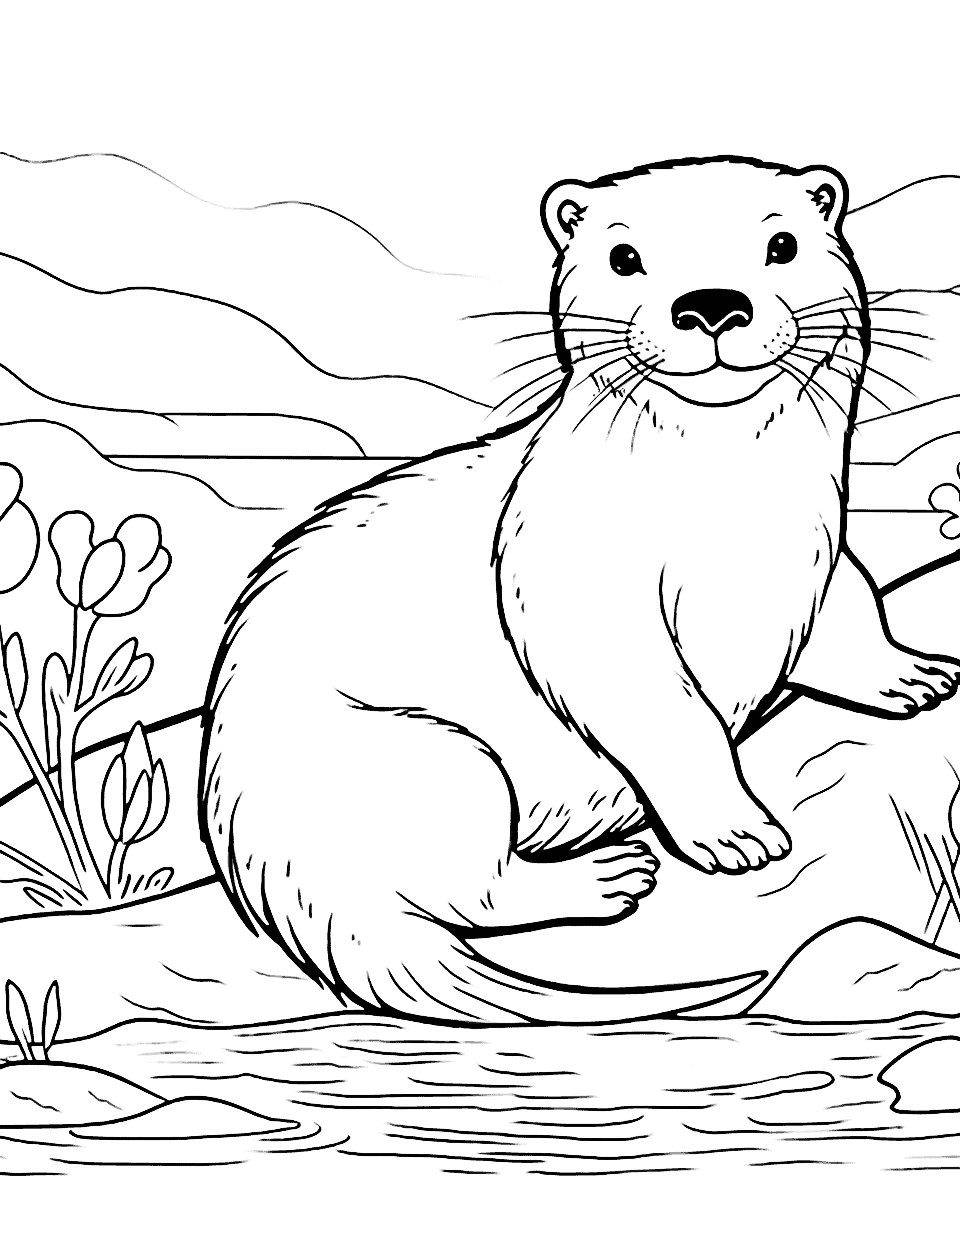 Playful Otter Sliding Animal Coloring Page - An otter sliding down a riverbank, full of joy and playfulness.